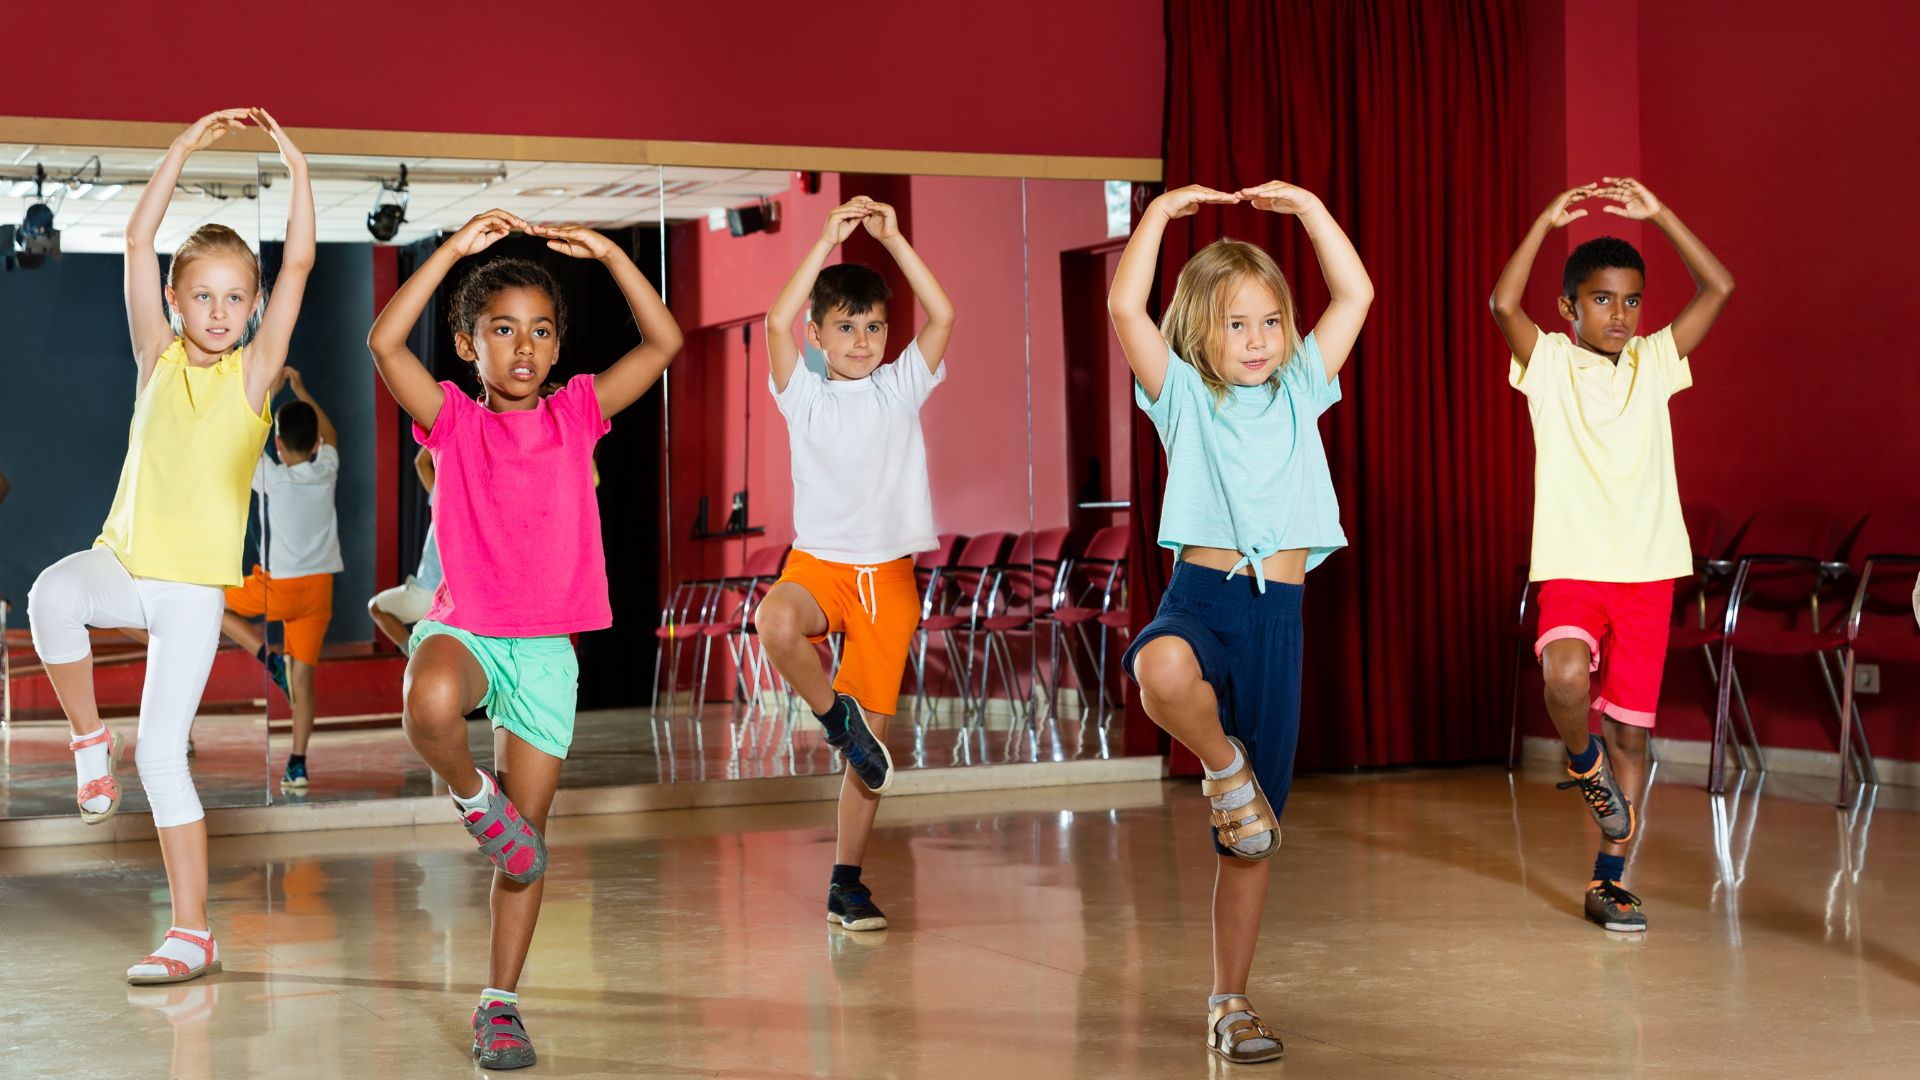 Group of young multicultural kids doing ballet in a studio room